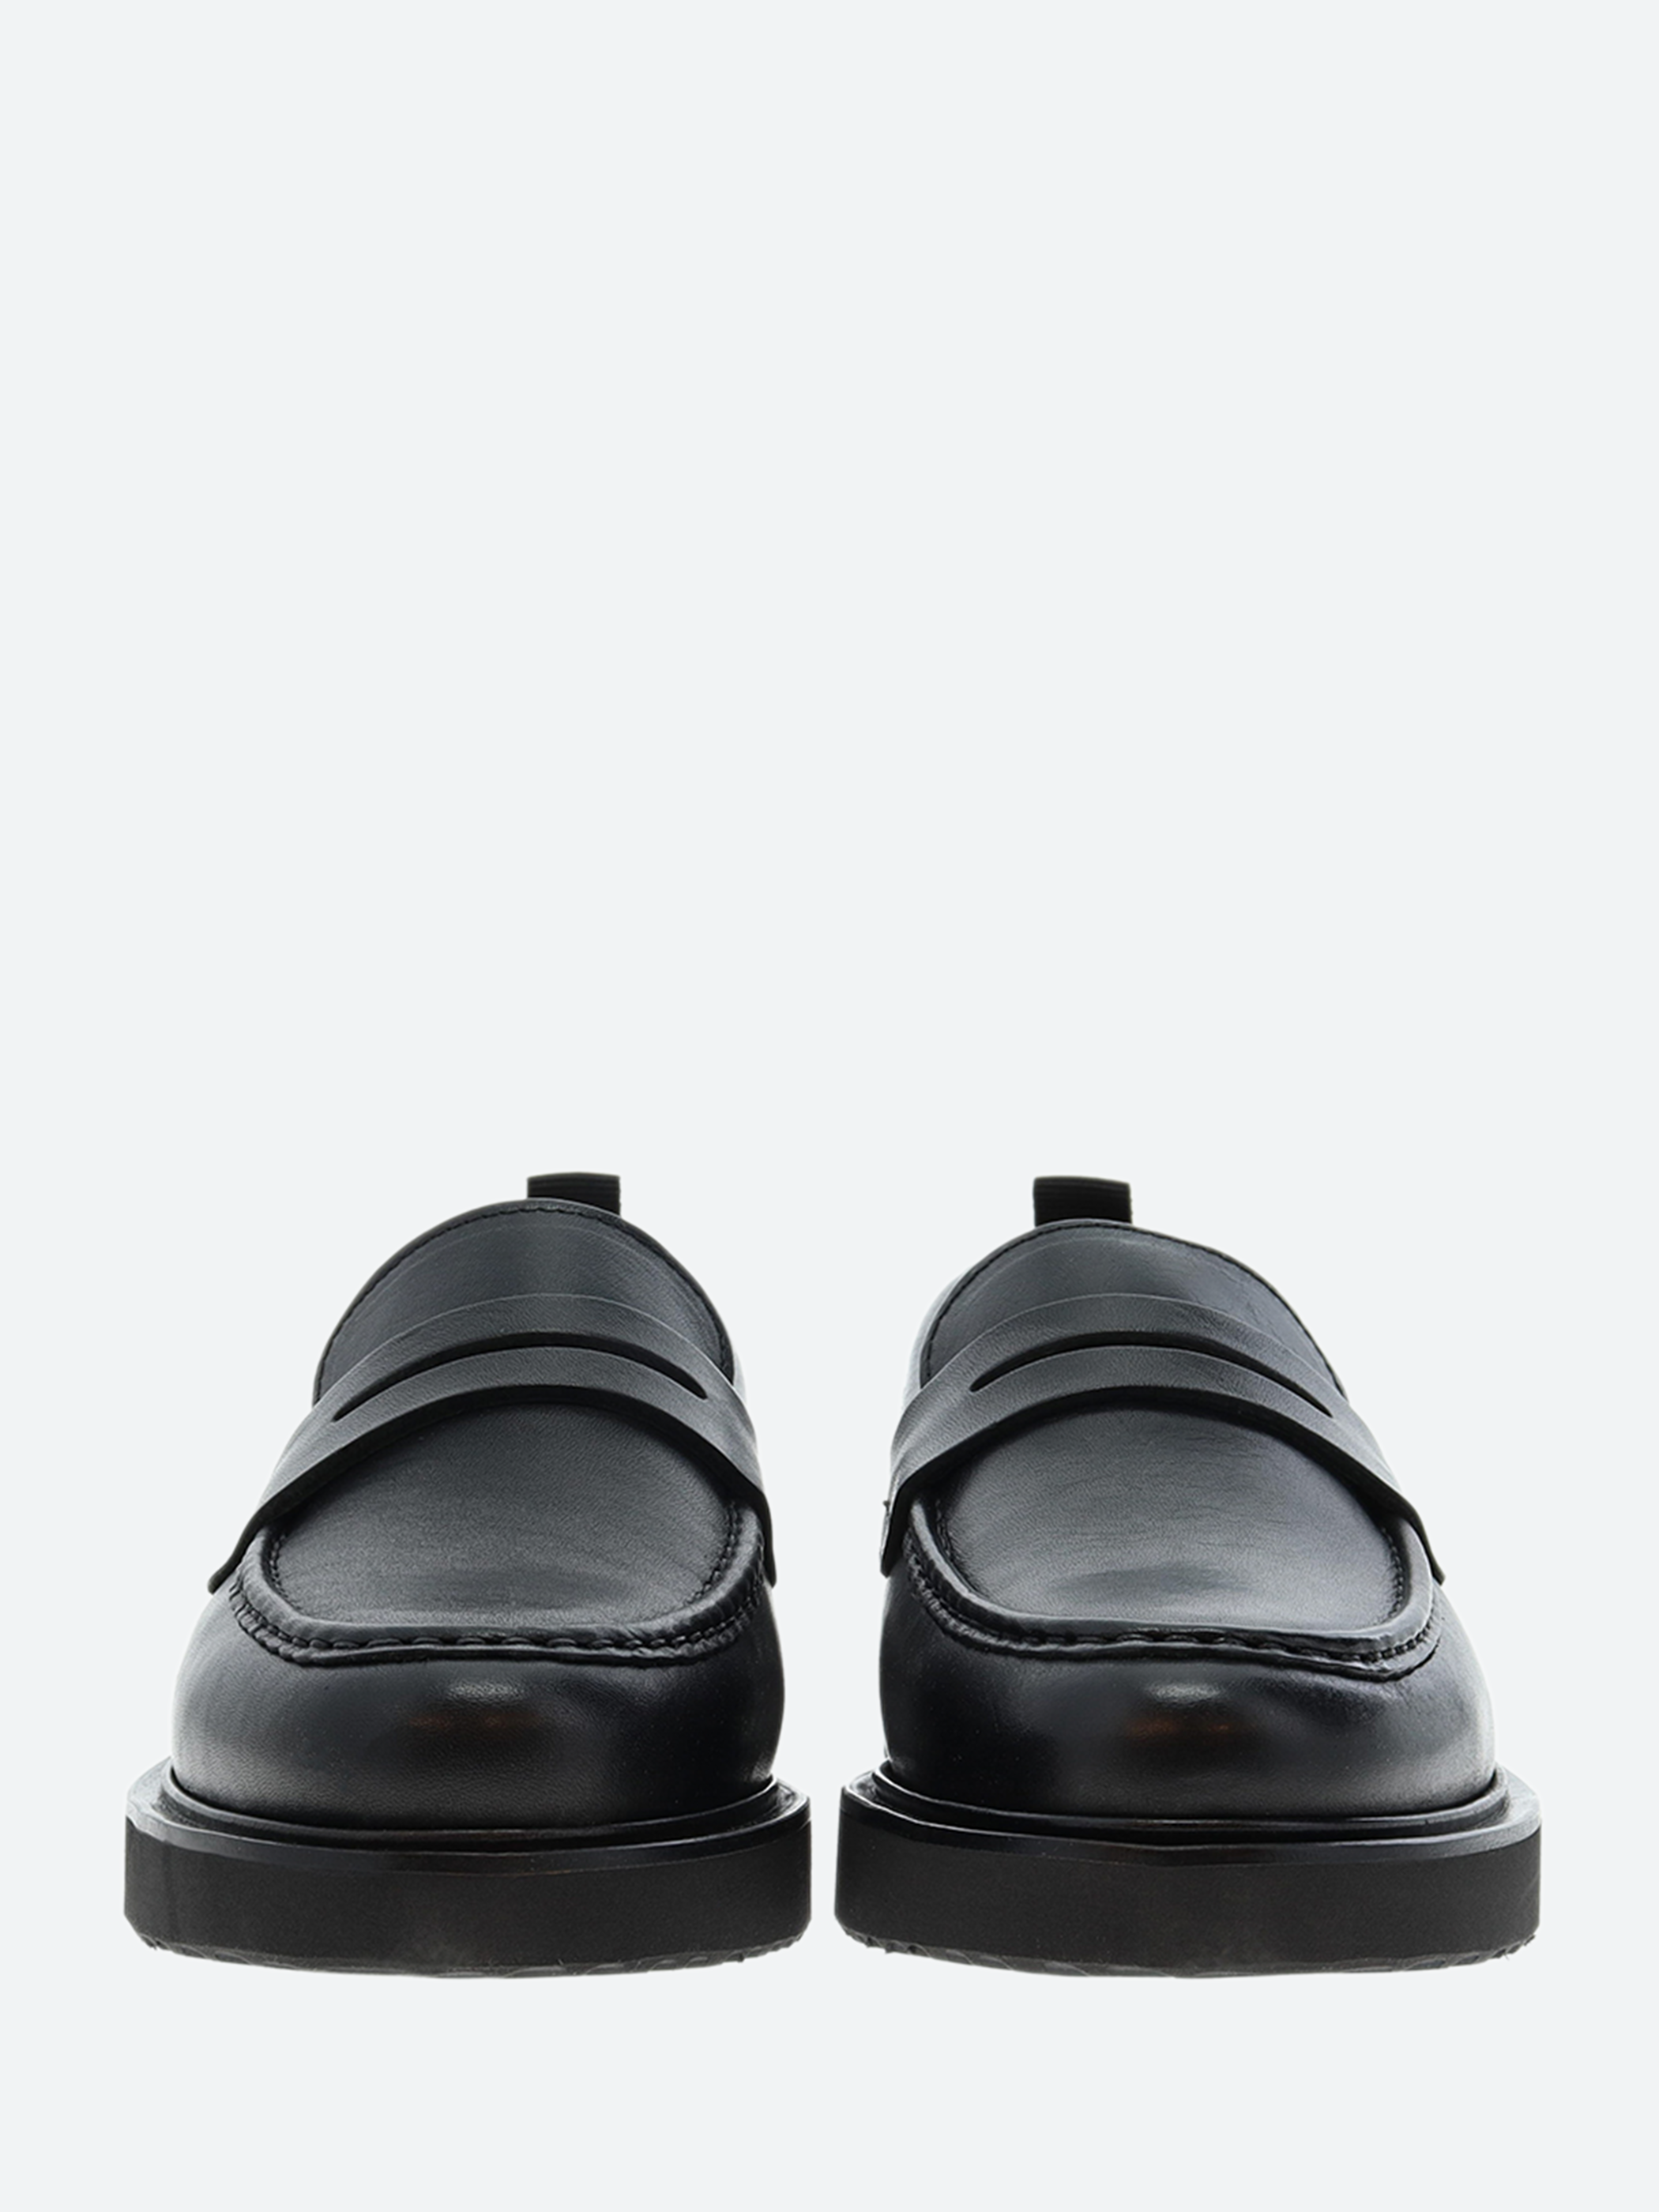 Cosmos 2 Loafer